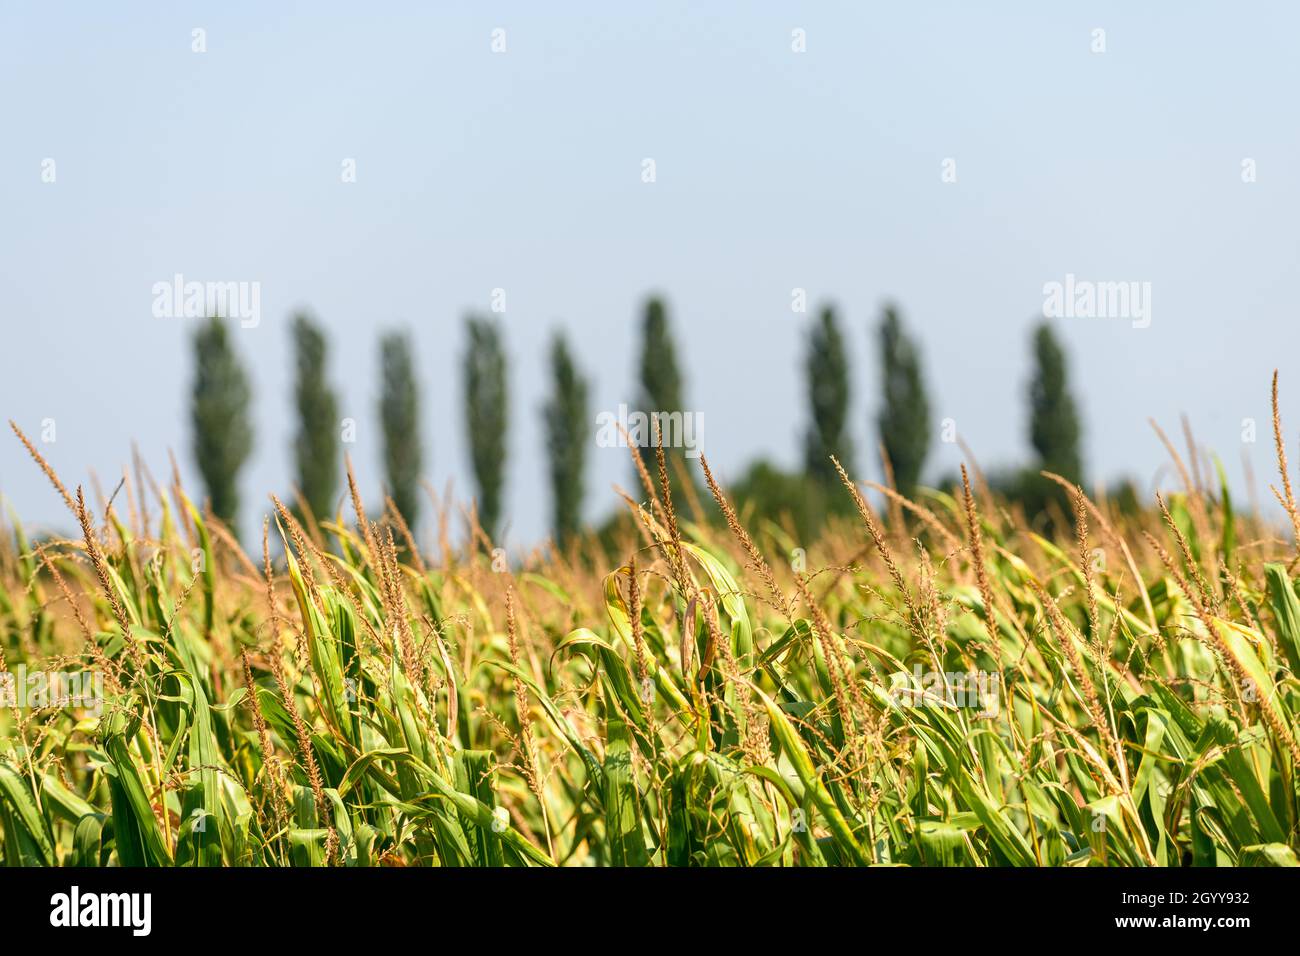 A grain field just before harvest with a line of pine trees in the blurred background. Stock Photo